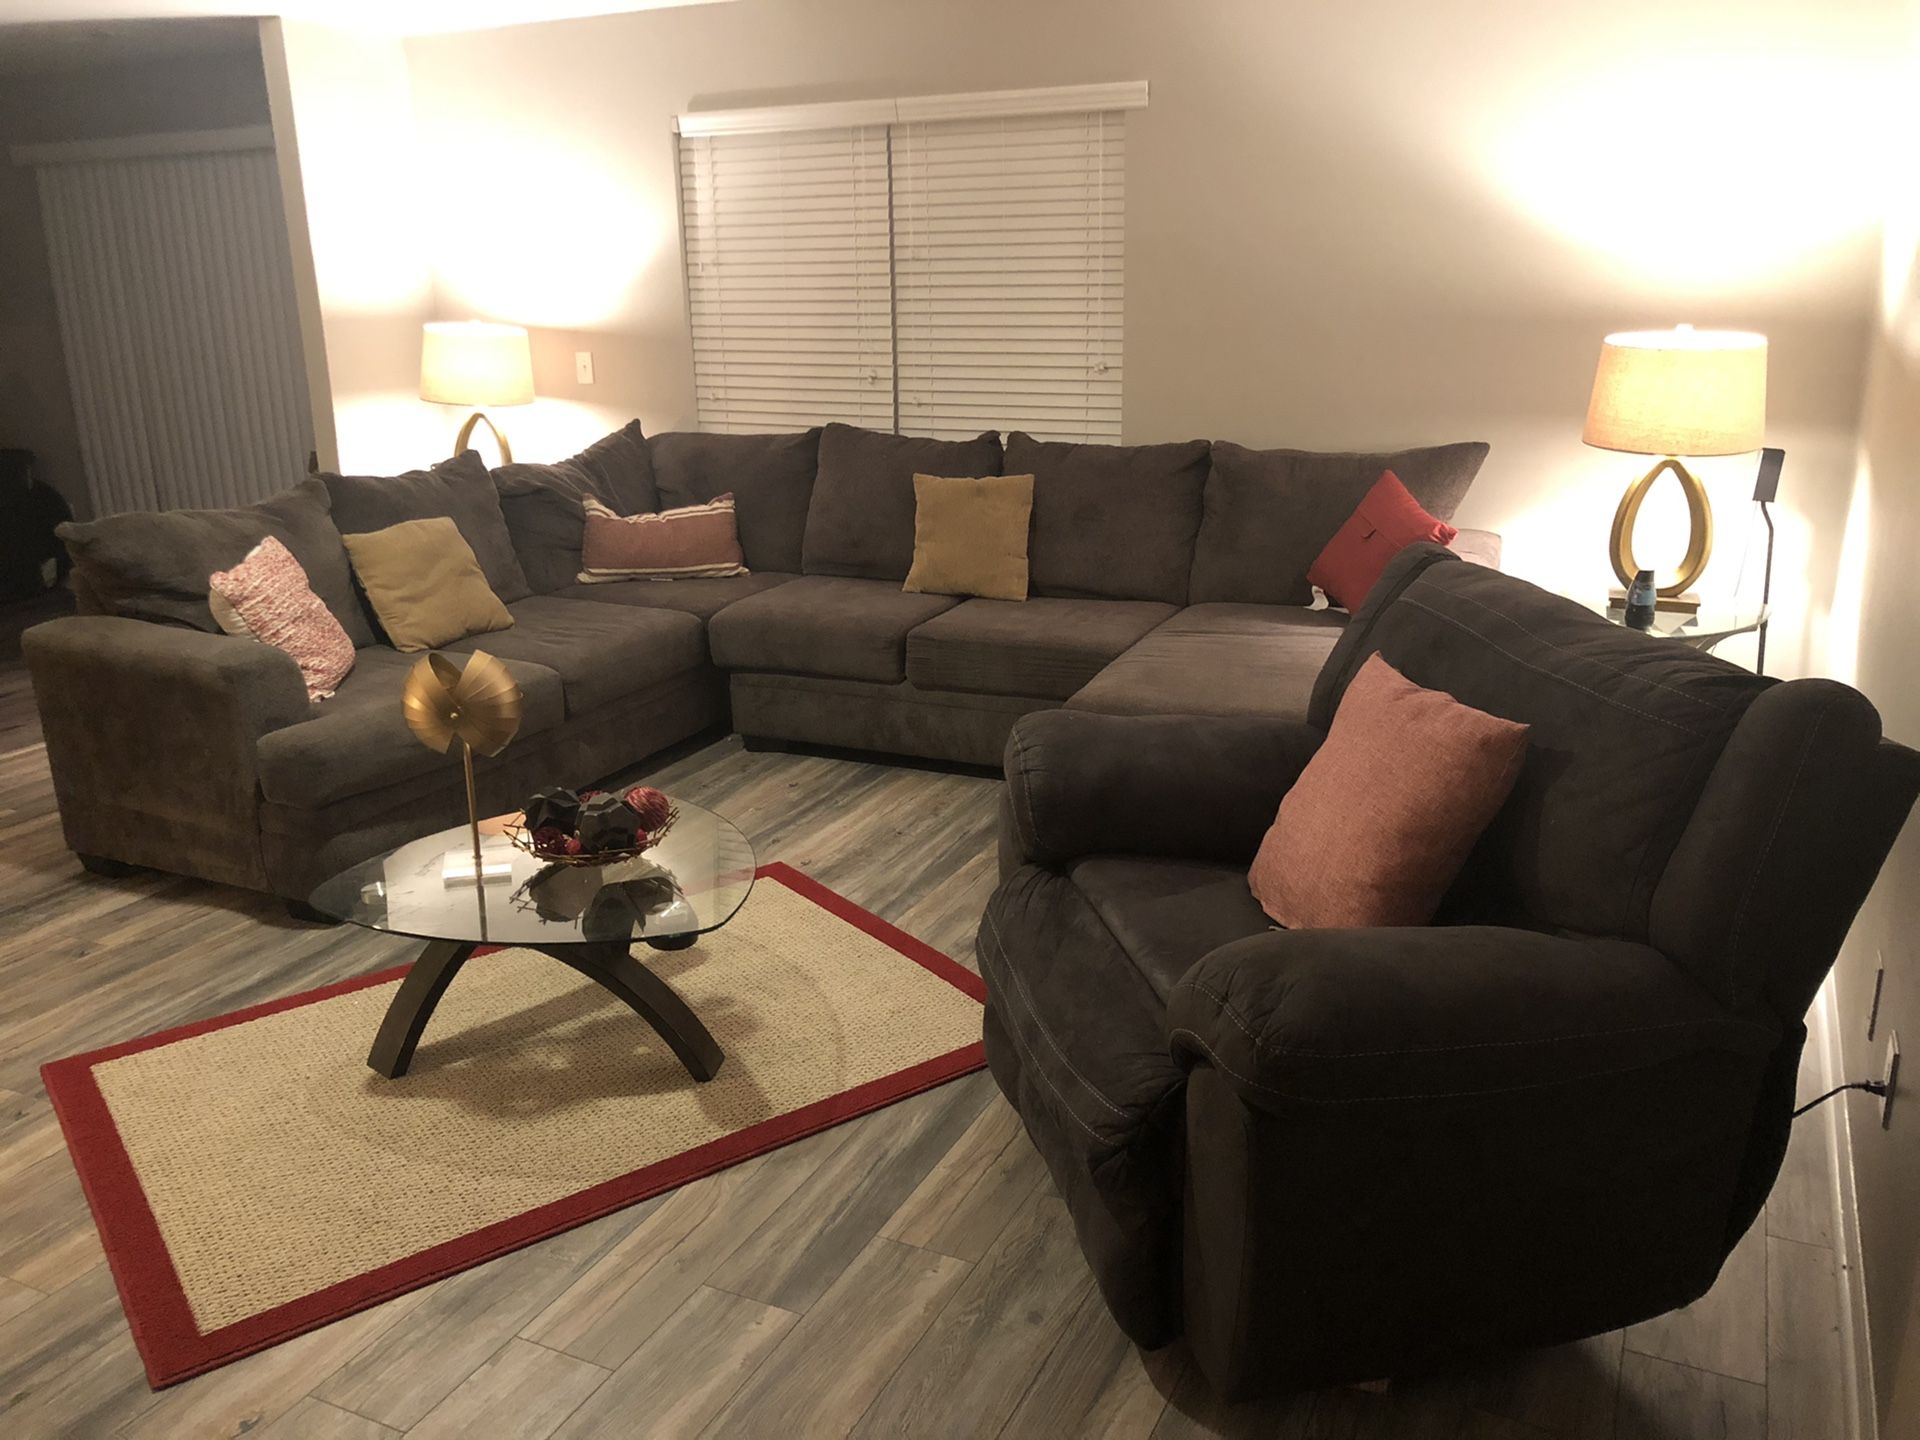 Huge sectional and oversized recliner